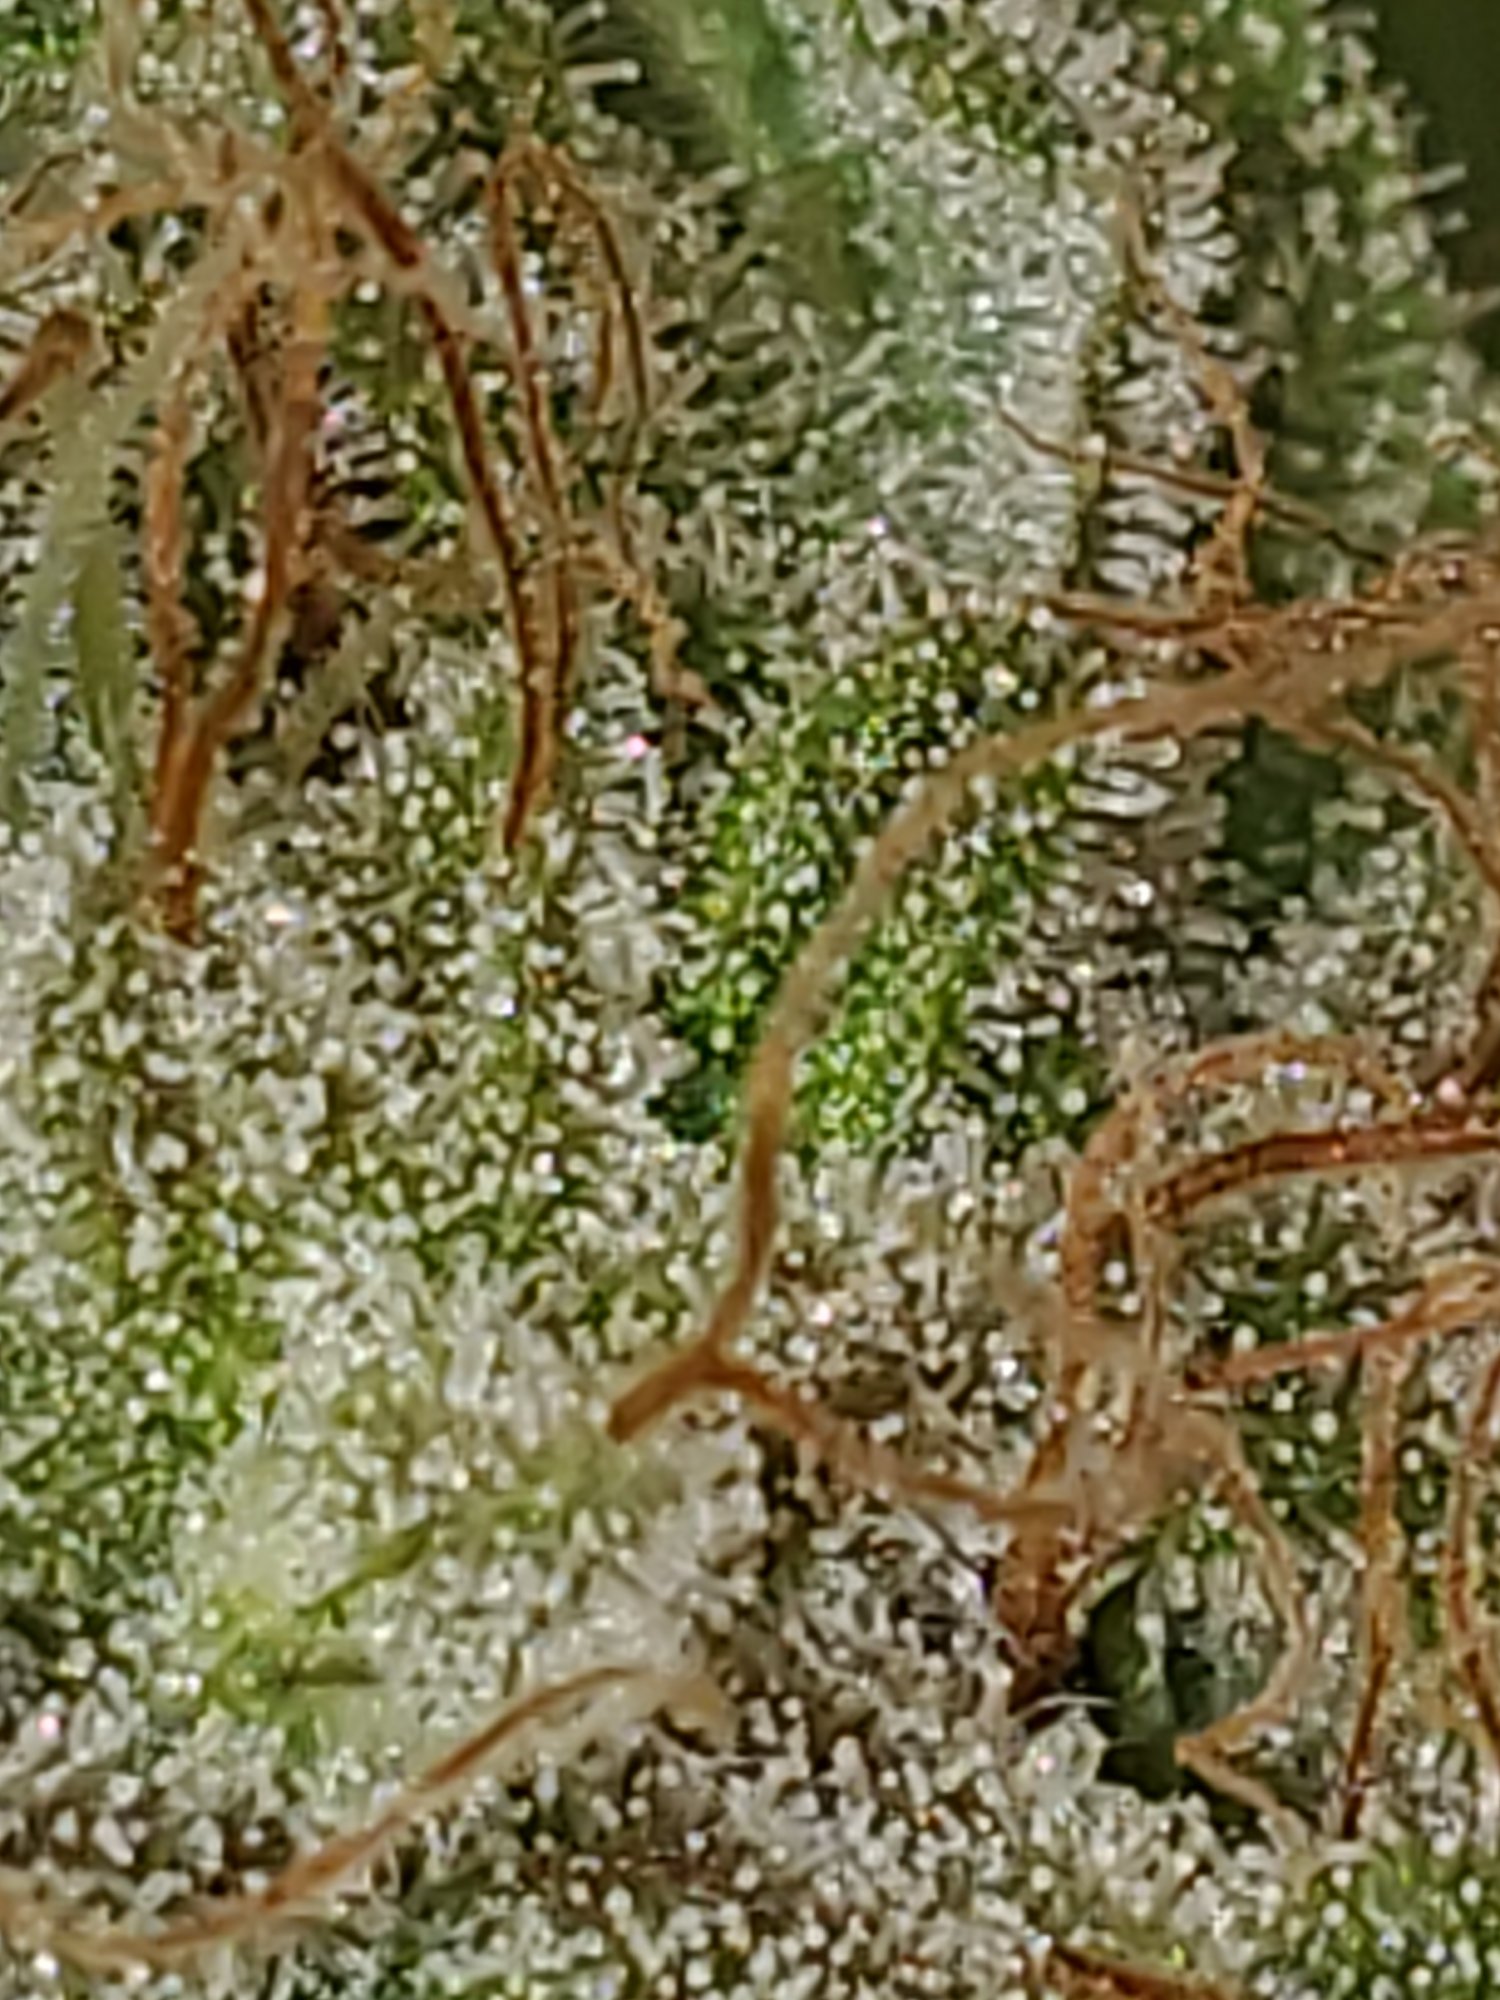 Trichomes are these cloudy or clear 6